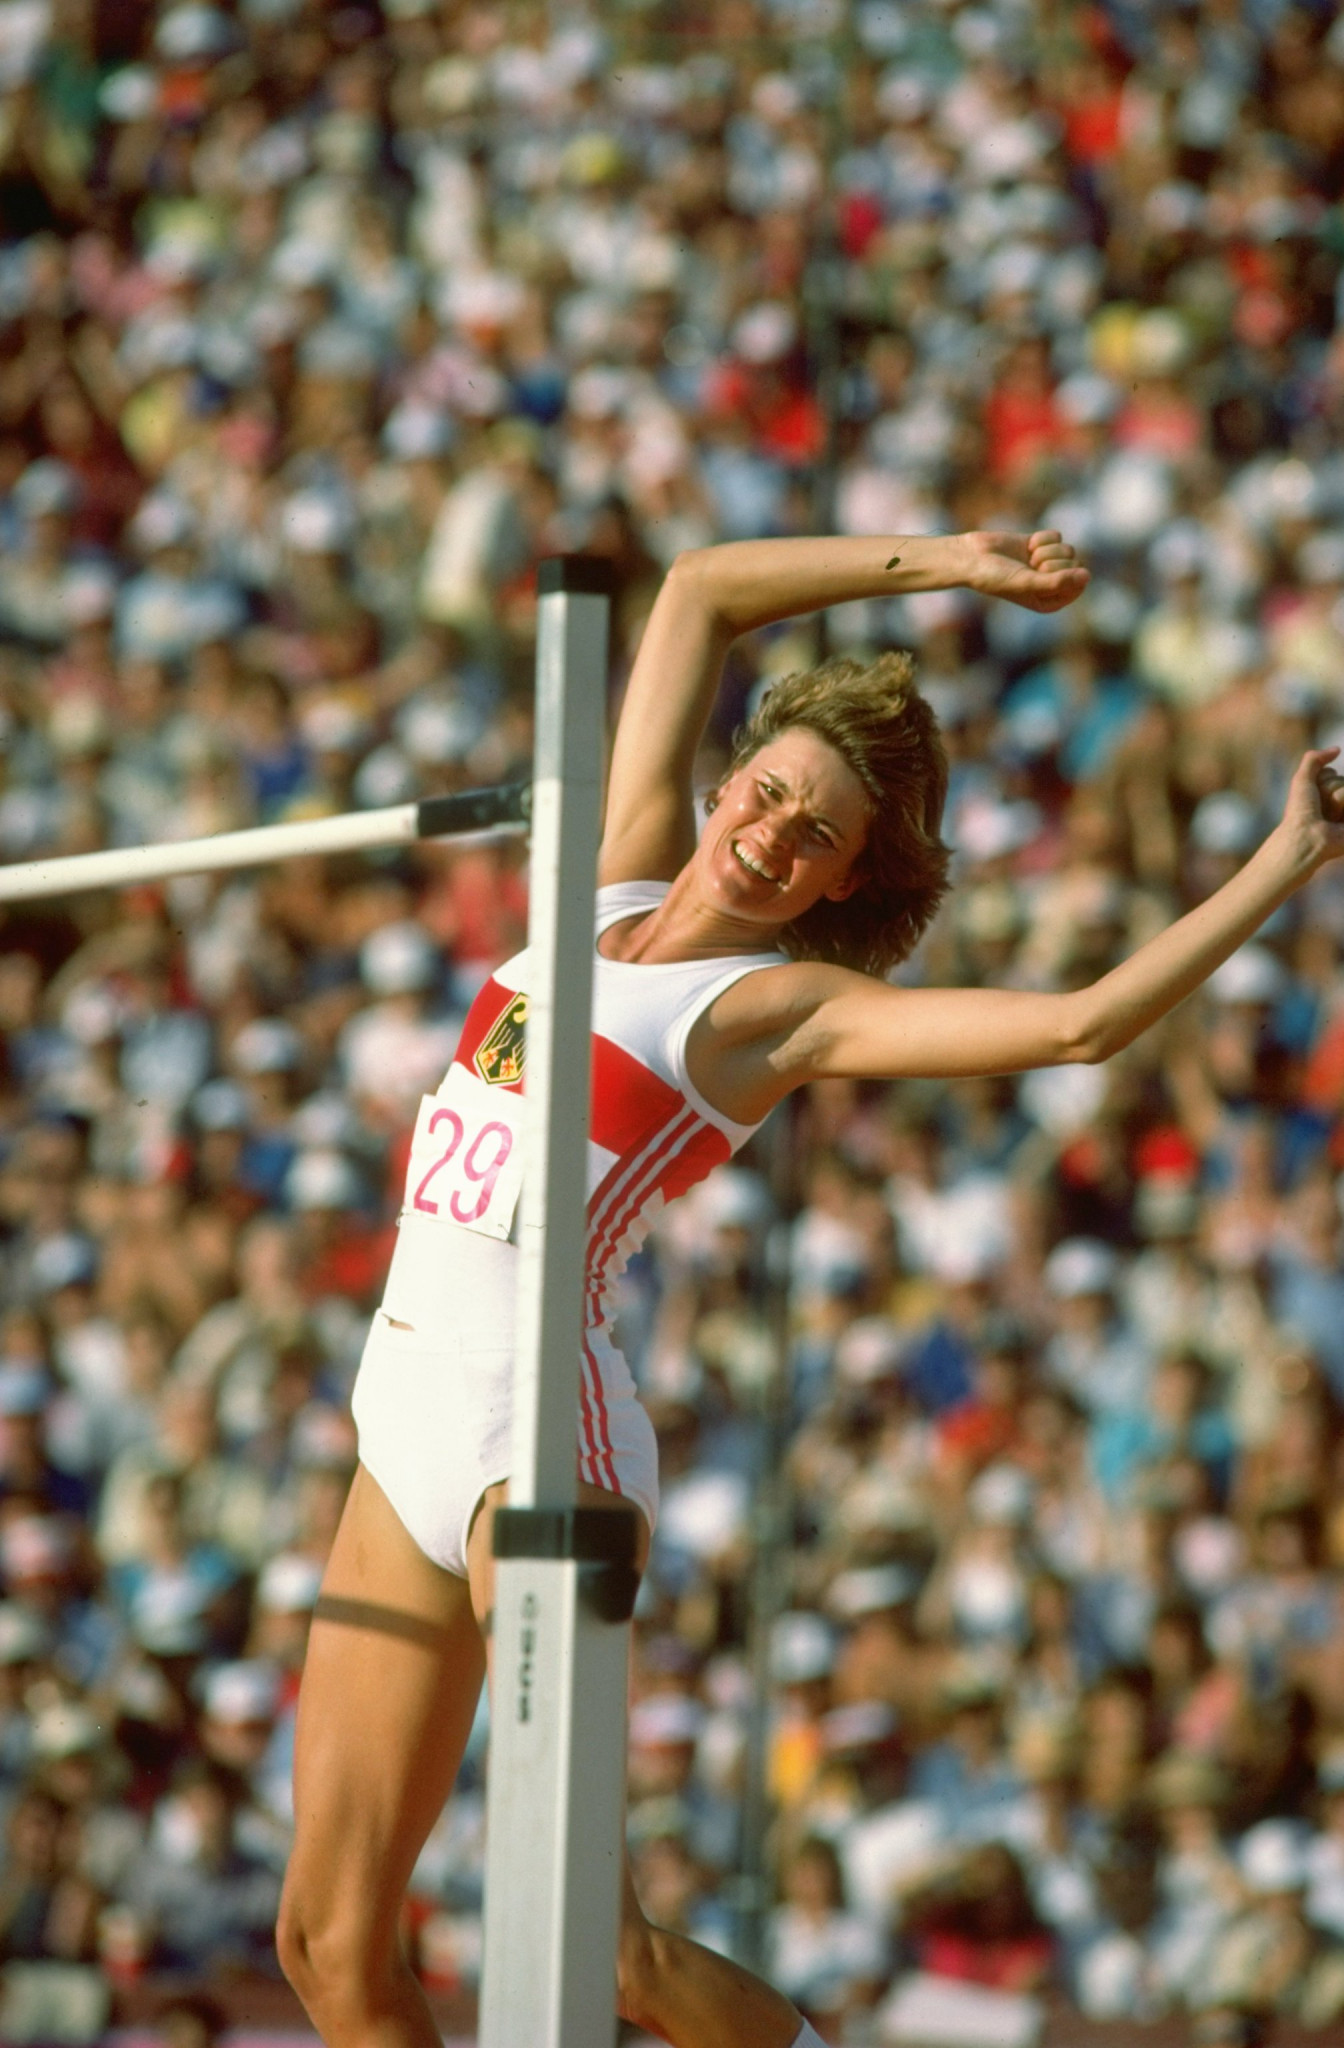 Germany finished second on the athletics medals table the last time Los Angeles hosted the Olympics in 1984, with its four gold medallists including Ulrike Meyfarth in the high jump ©Getty Images